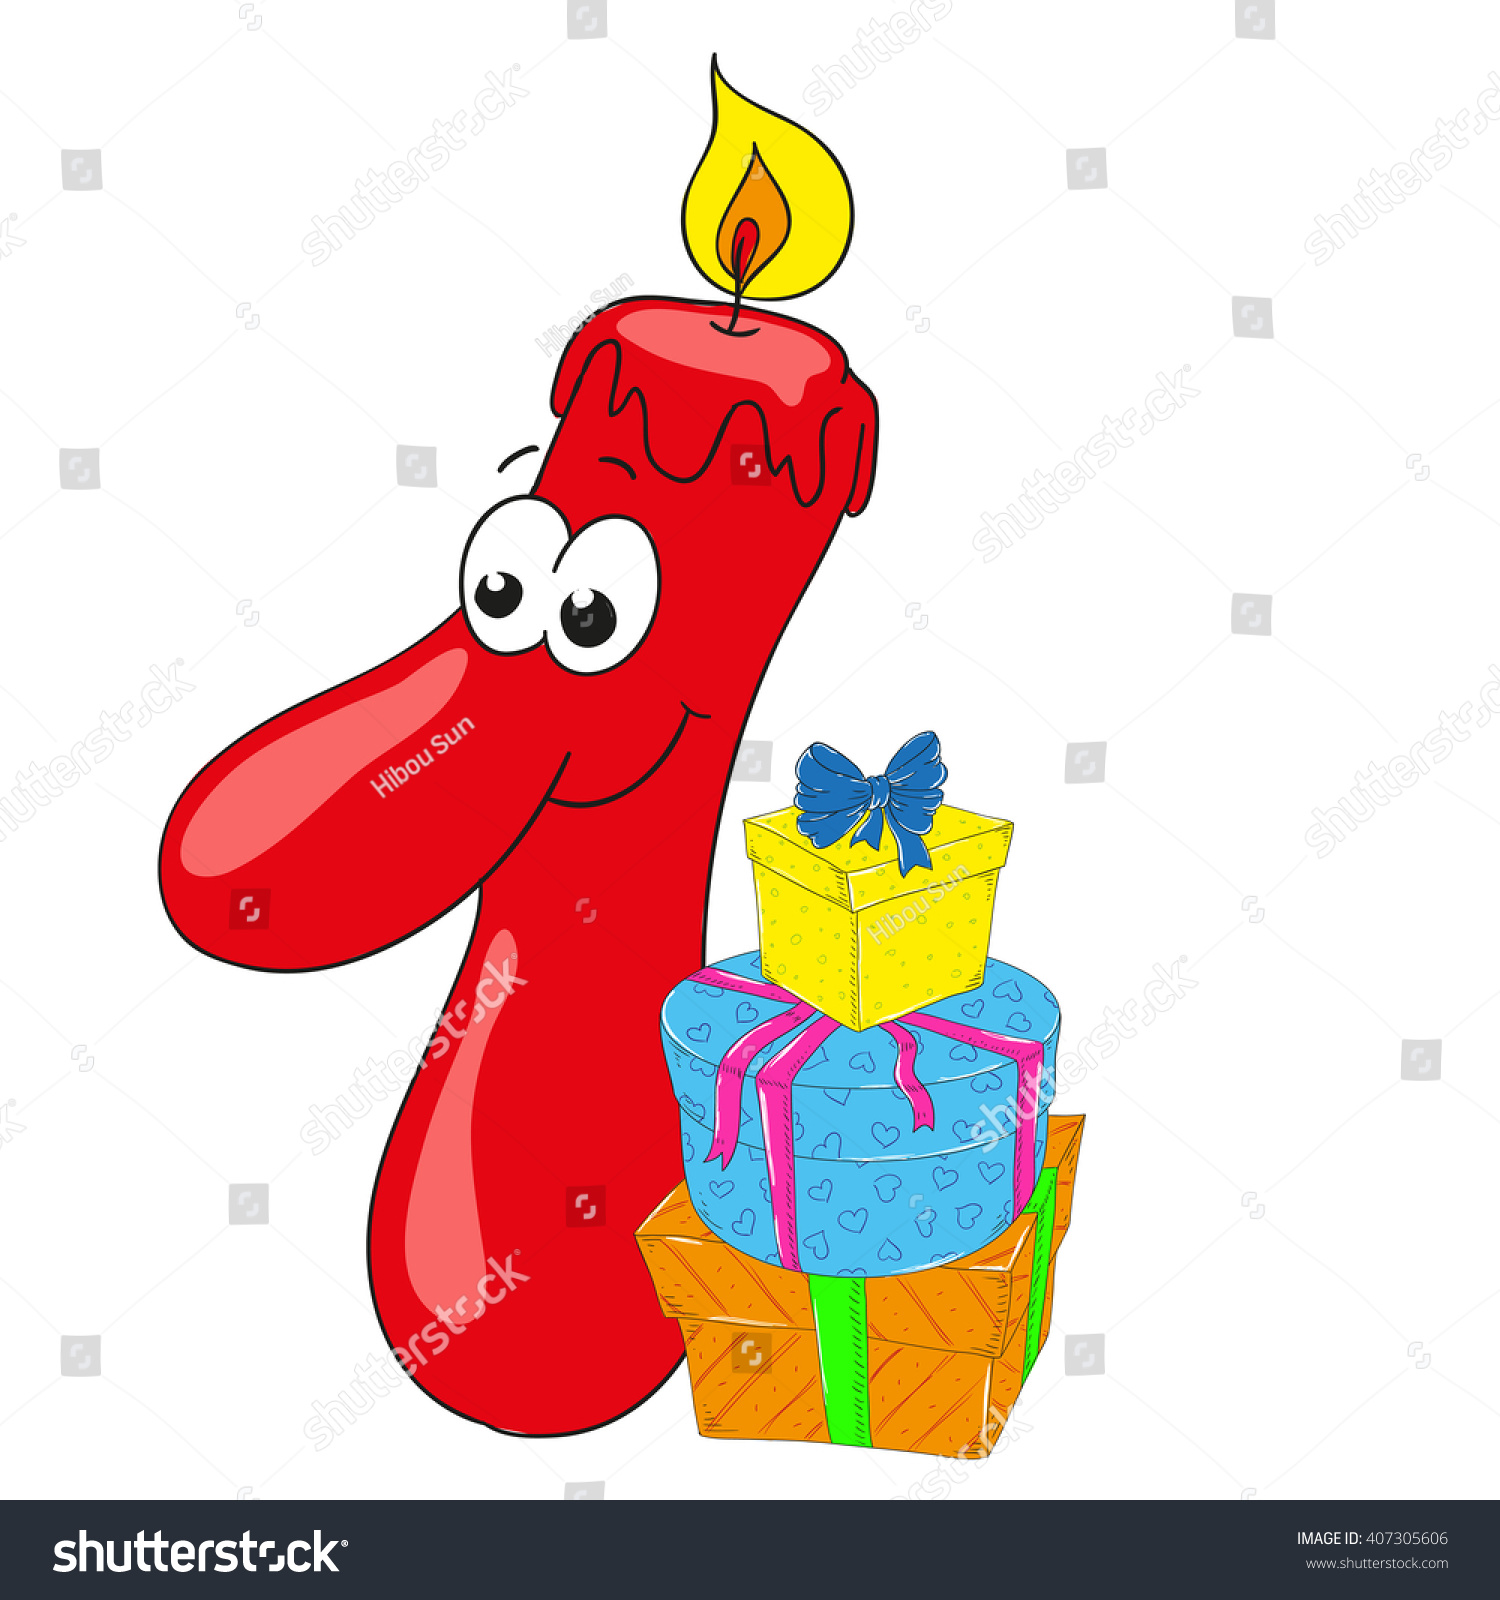 Cartoon Numbers Gifts Character Vector Stock Vector (Royalty Free ...